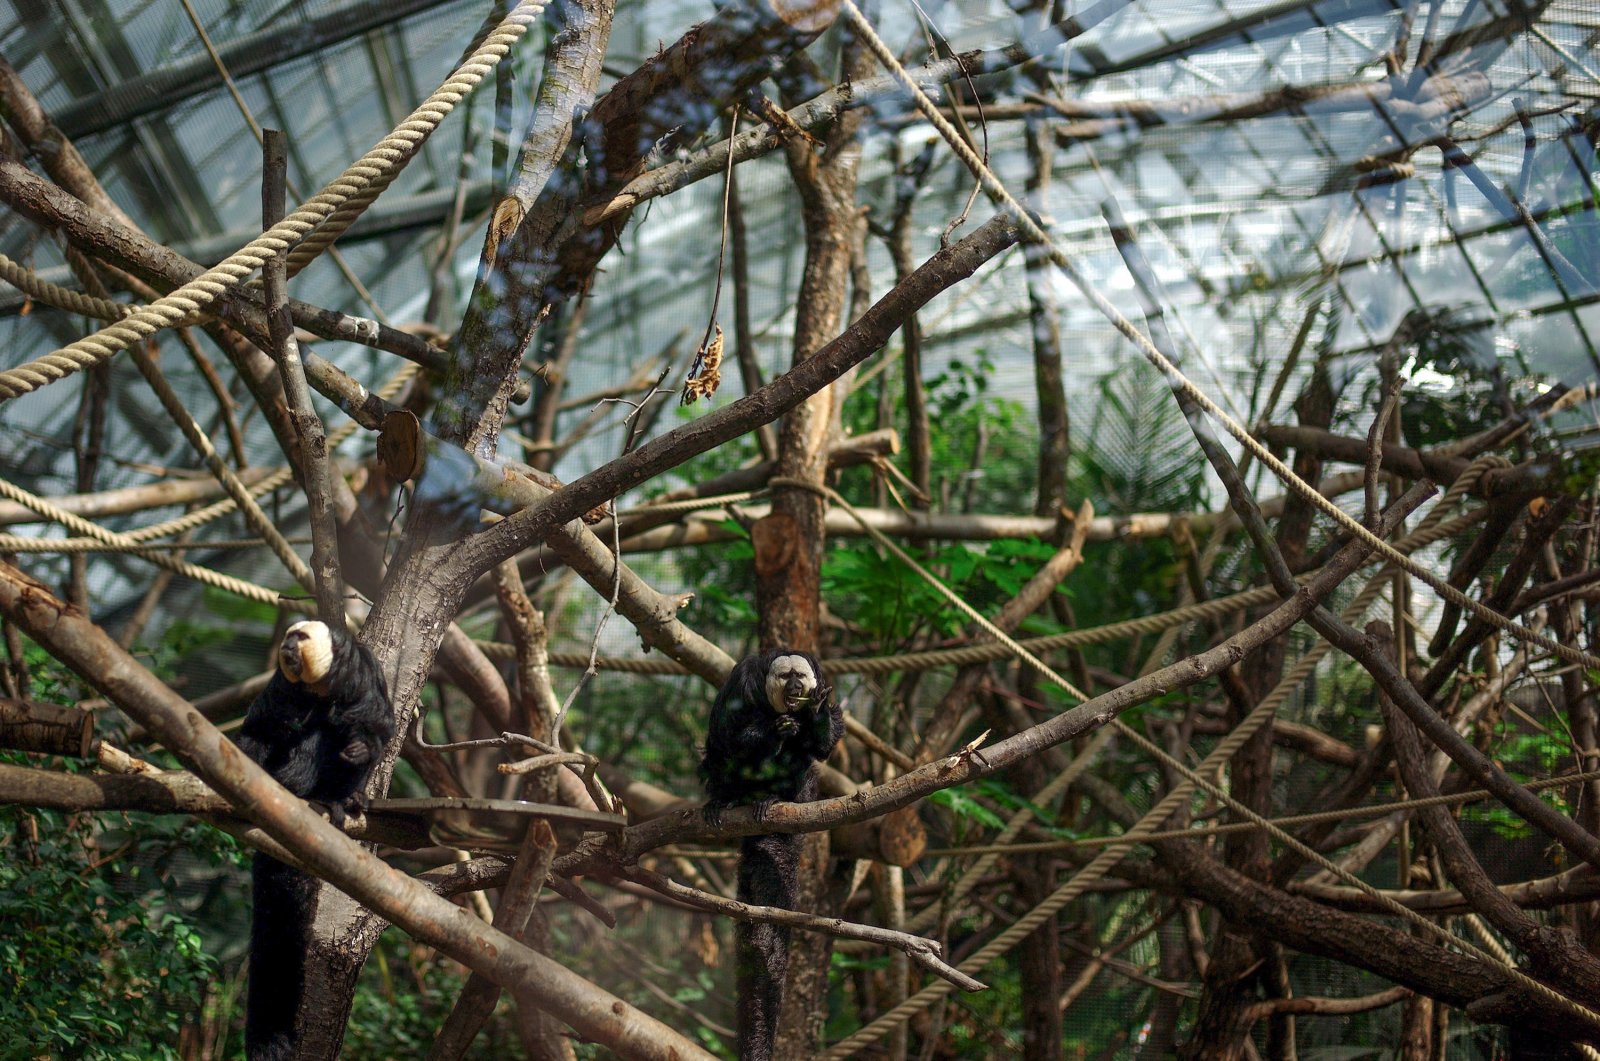 White-faced saki monkeys eat in their enclosure, at the Vincennes Zoo, in Paris, April 8, 2014. (AP Photo)